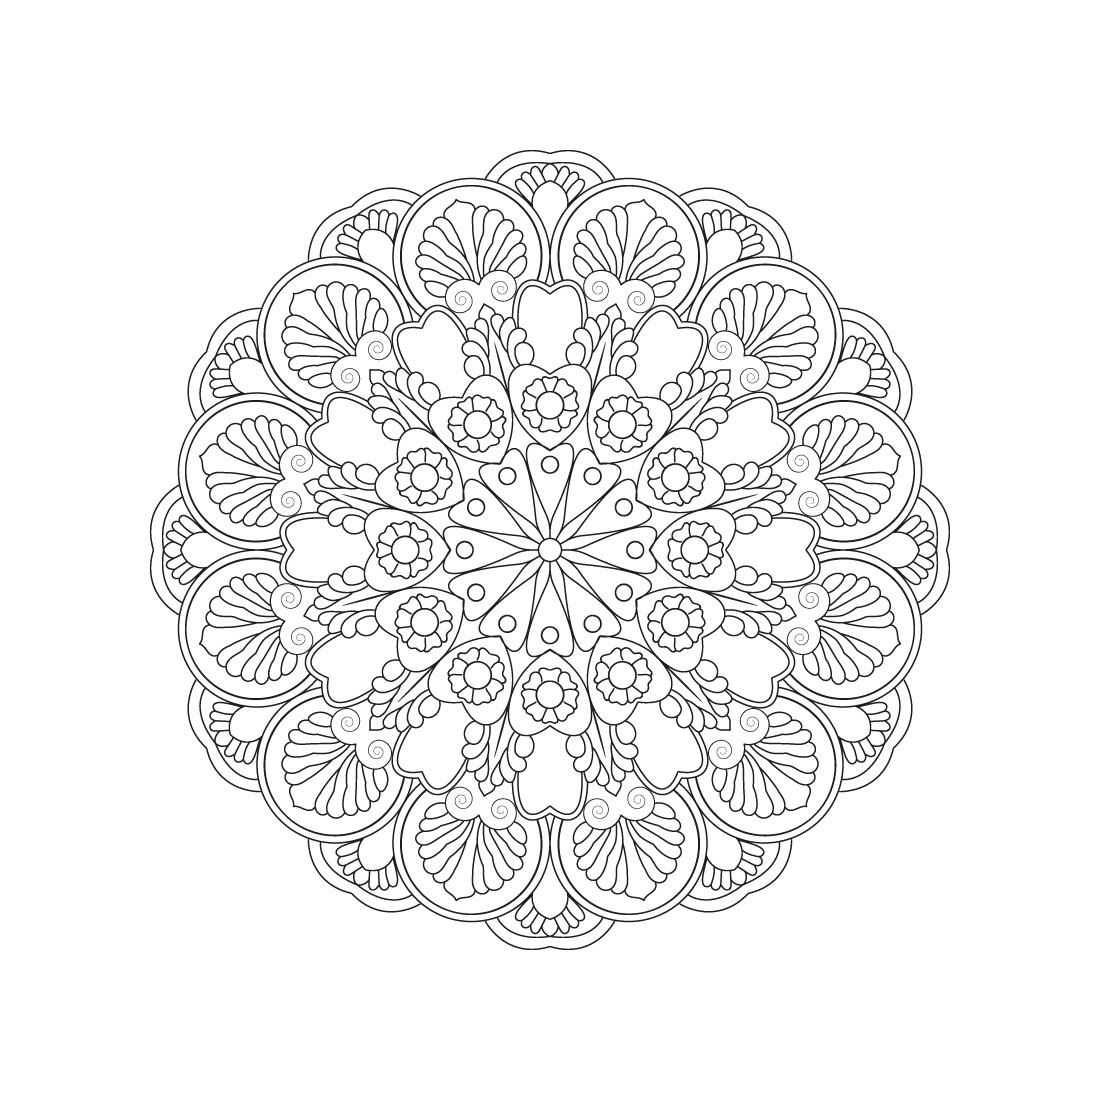 bundle of 10 tranquility mandala coloring book pages 03 591